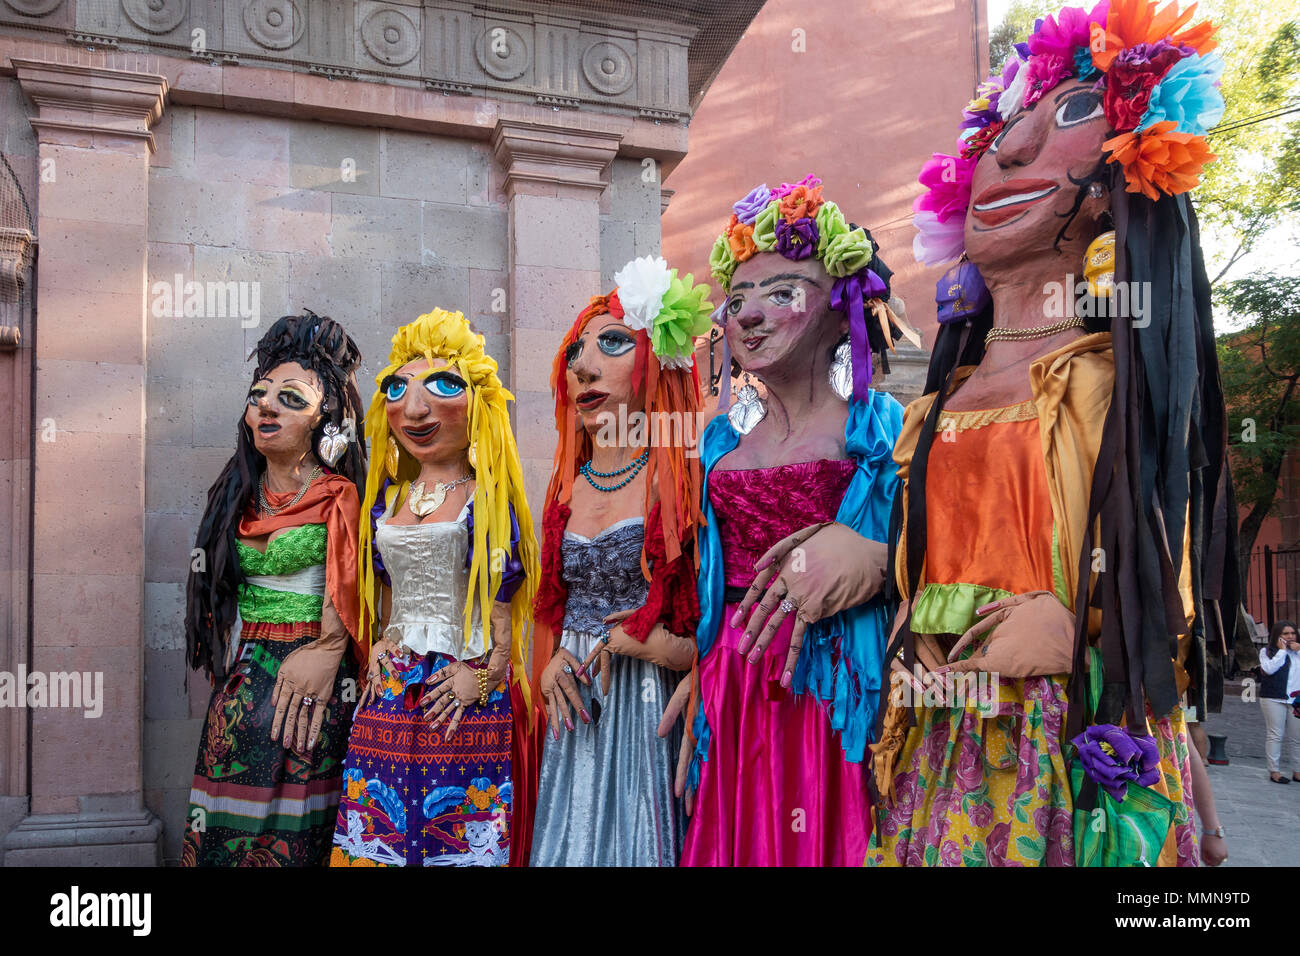 Giant puppets called mojigangas in San Miguel de Allende, Mexico Stock Photo